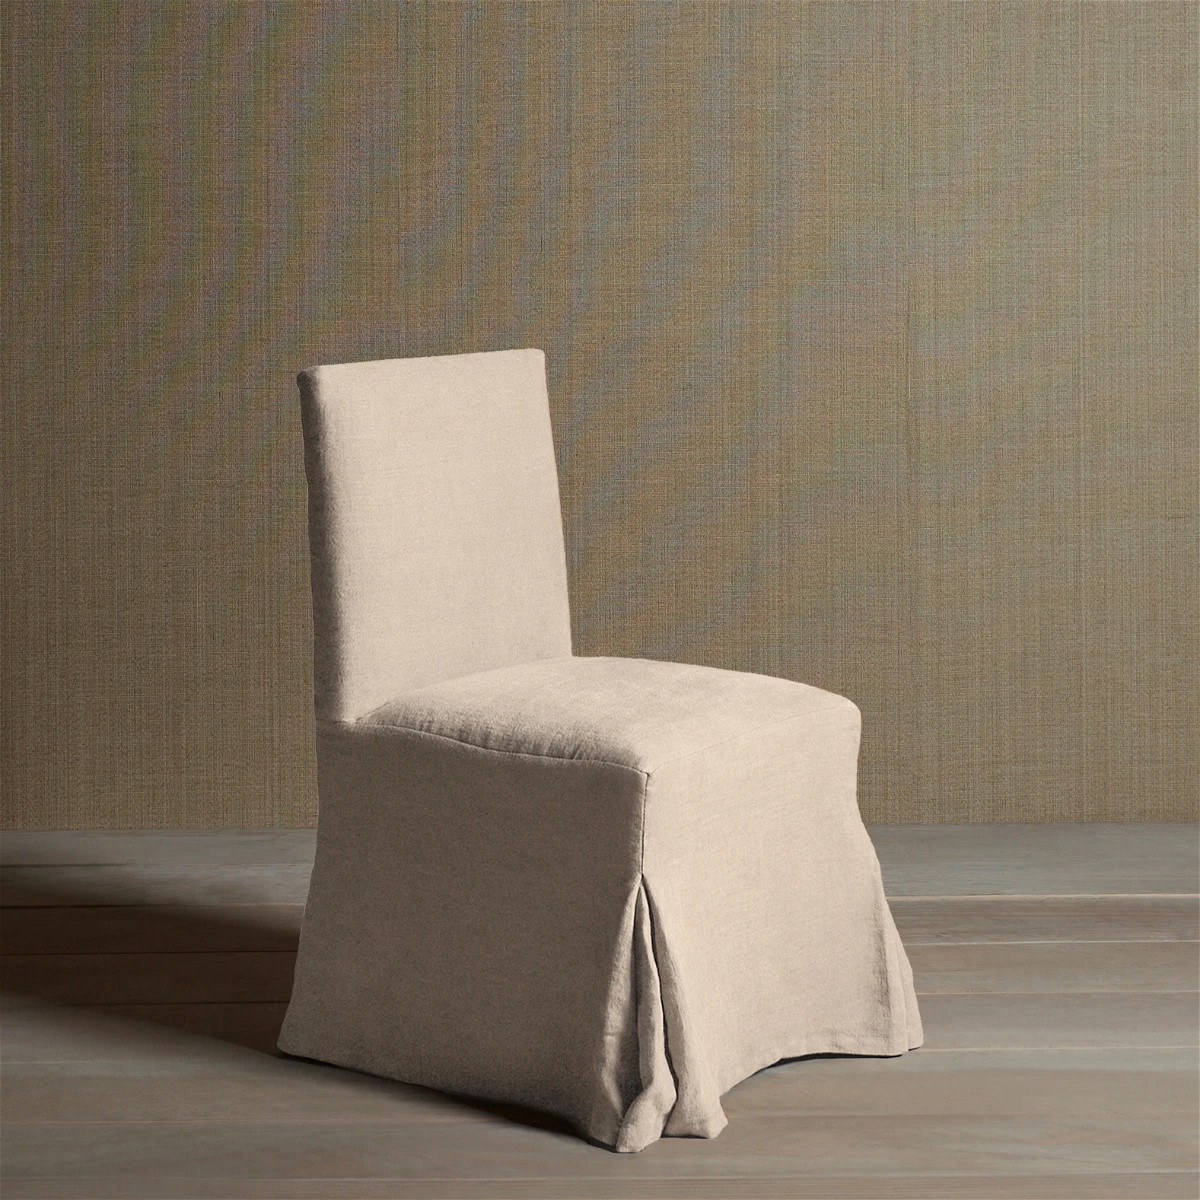 a chair with a white cover on it